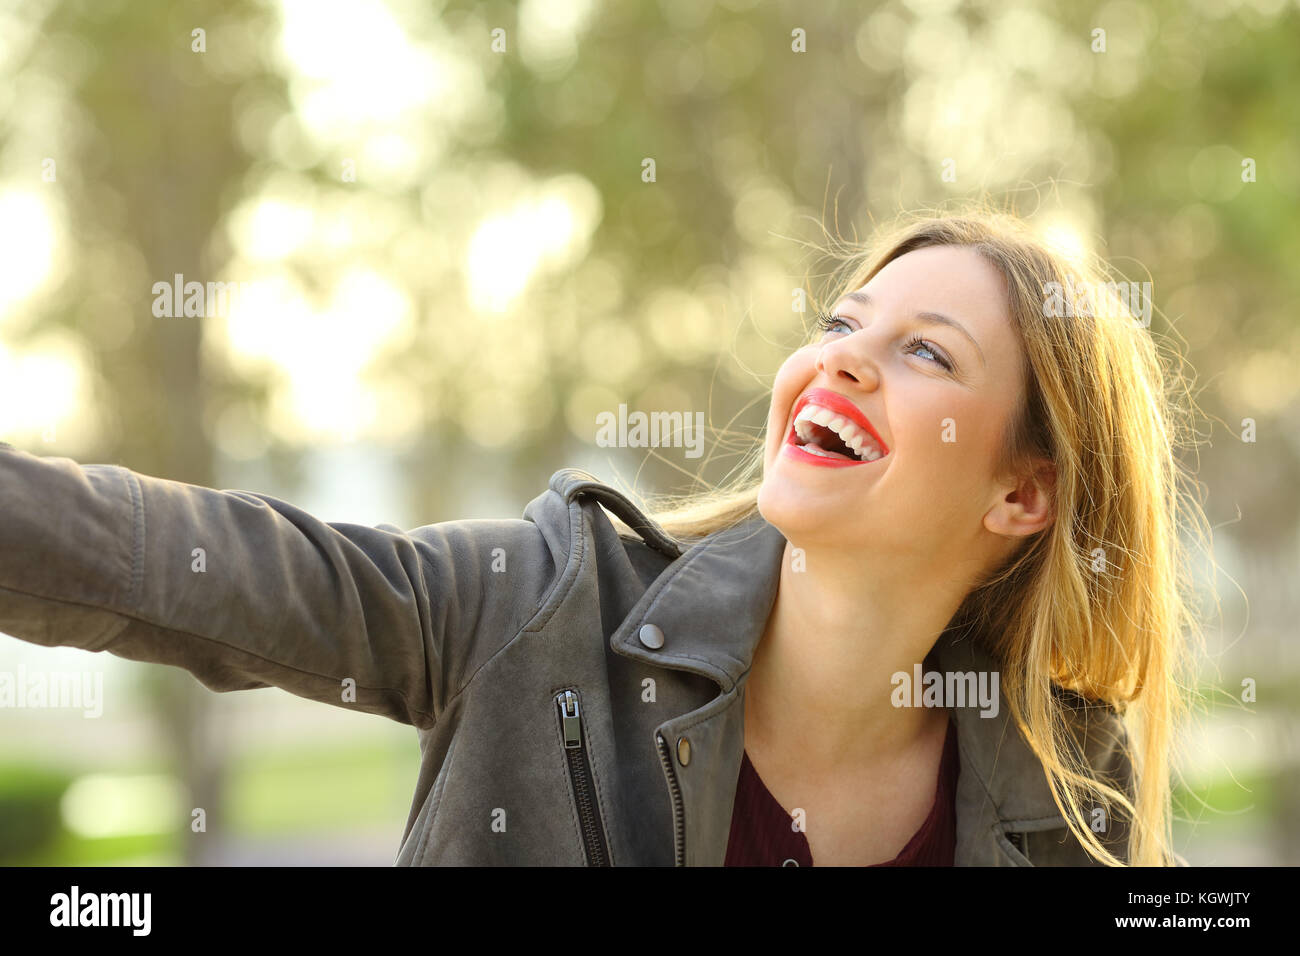 Portrait of a candid girl laughing and joking outdoors in a park Stock Photo